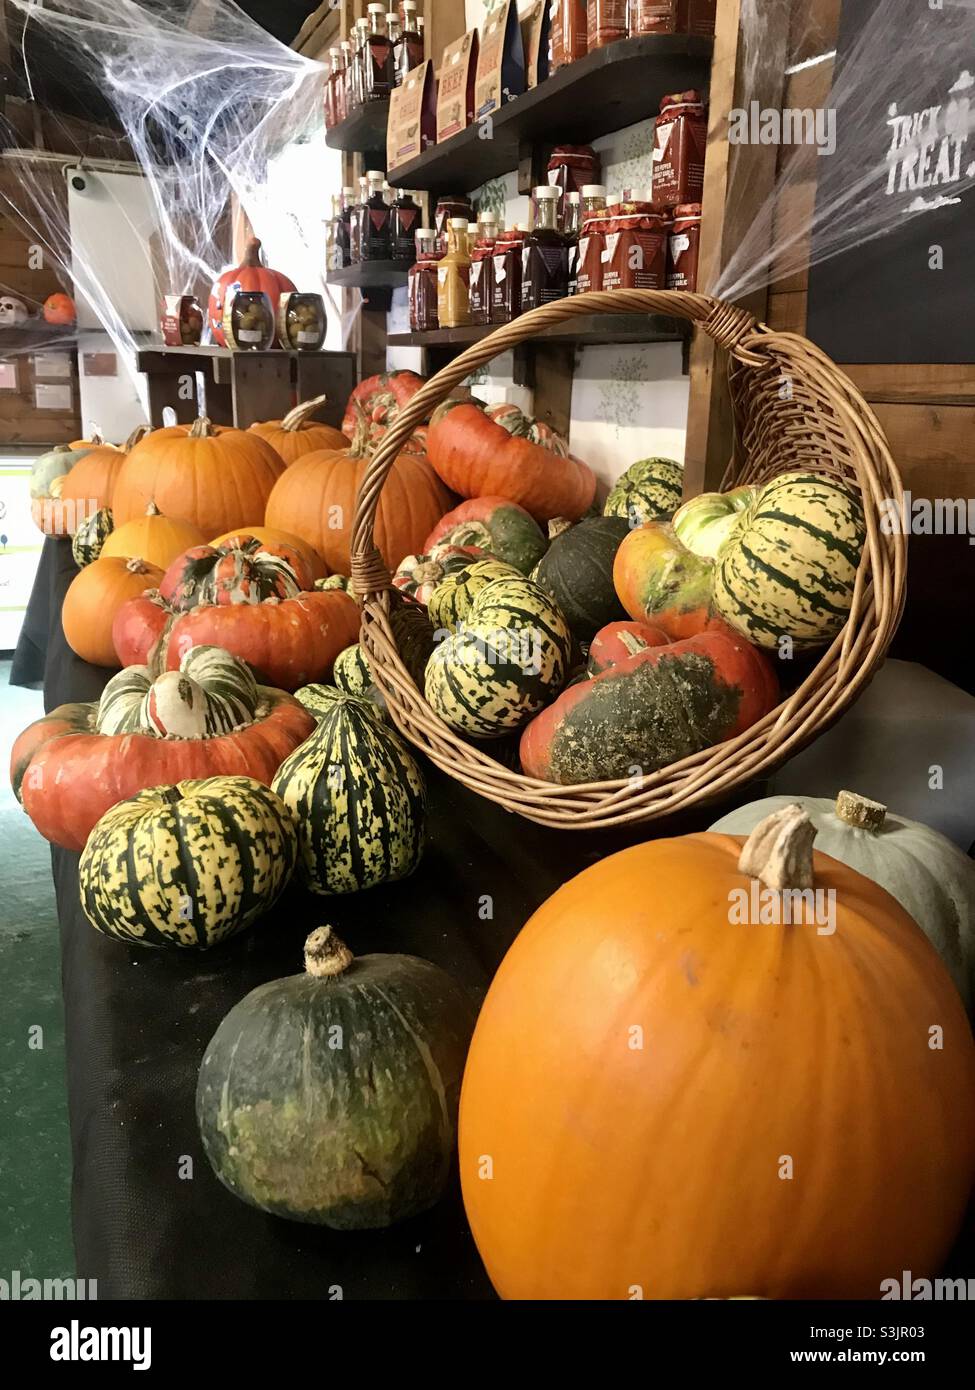 A selection of pumpkins and squashes on display in a shop during Halloween time Stock Photo